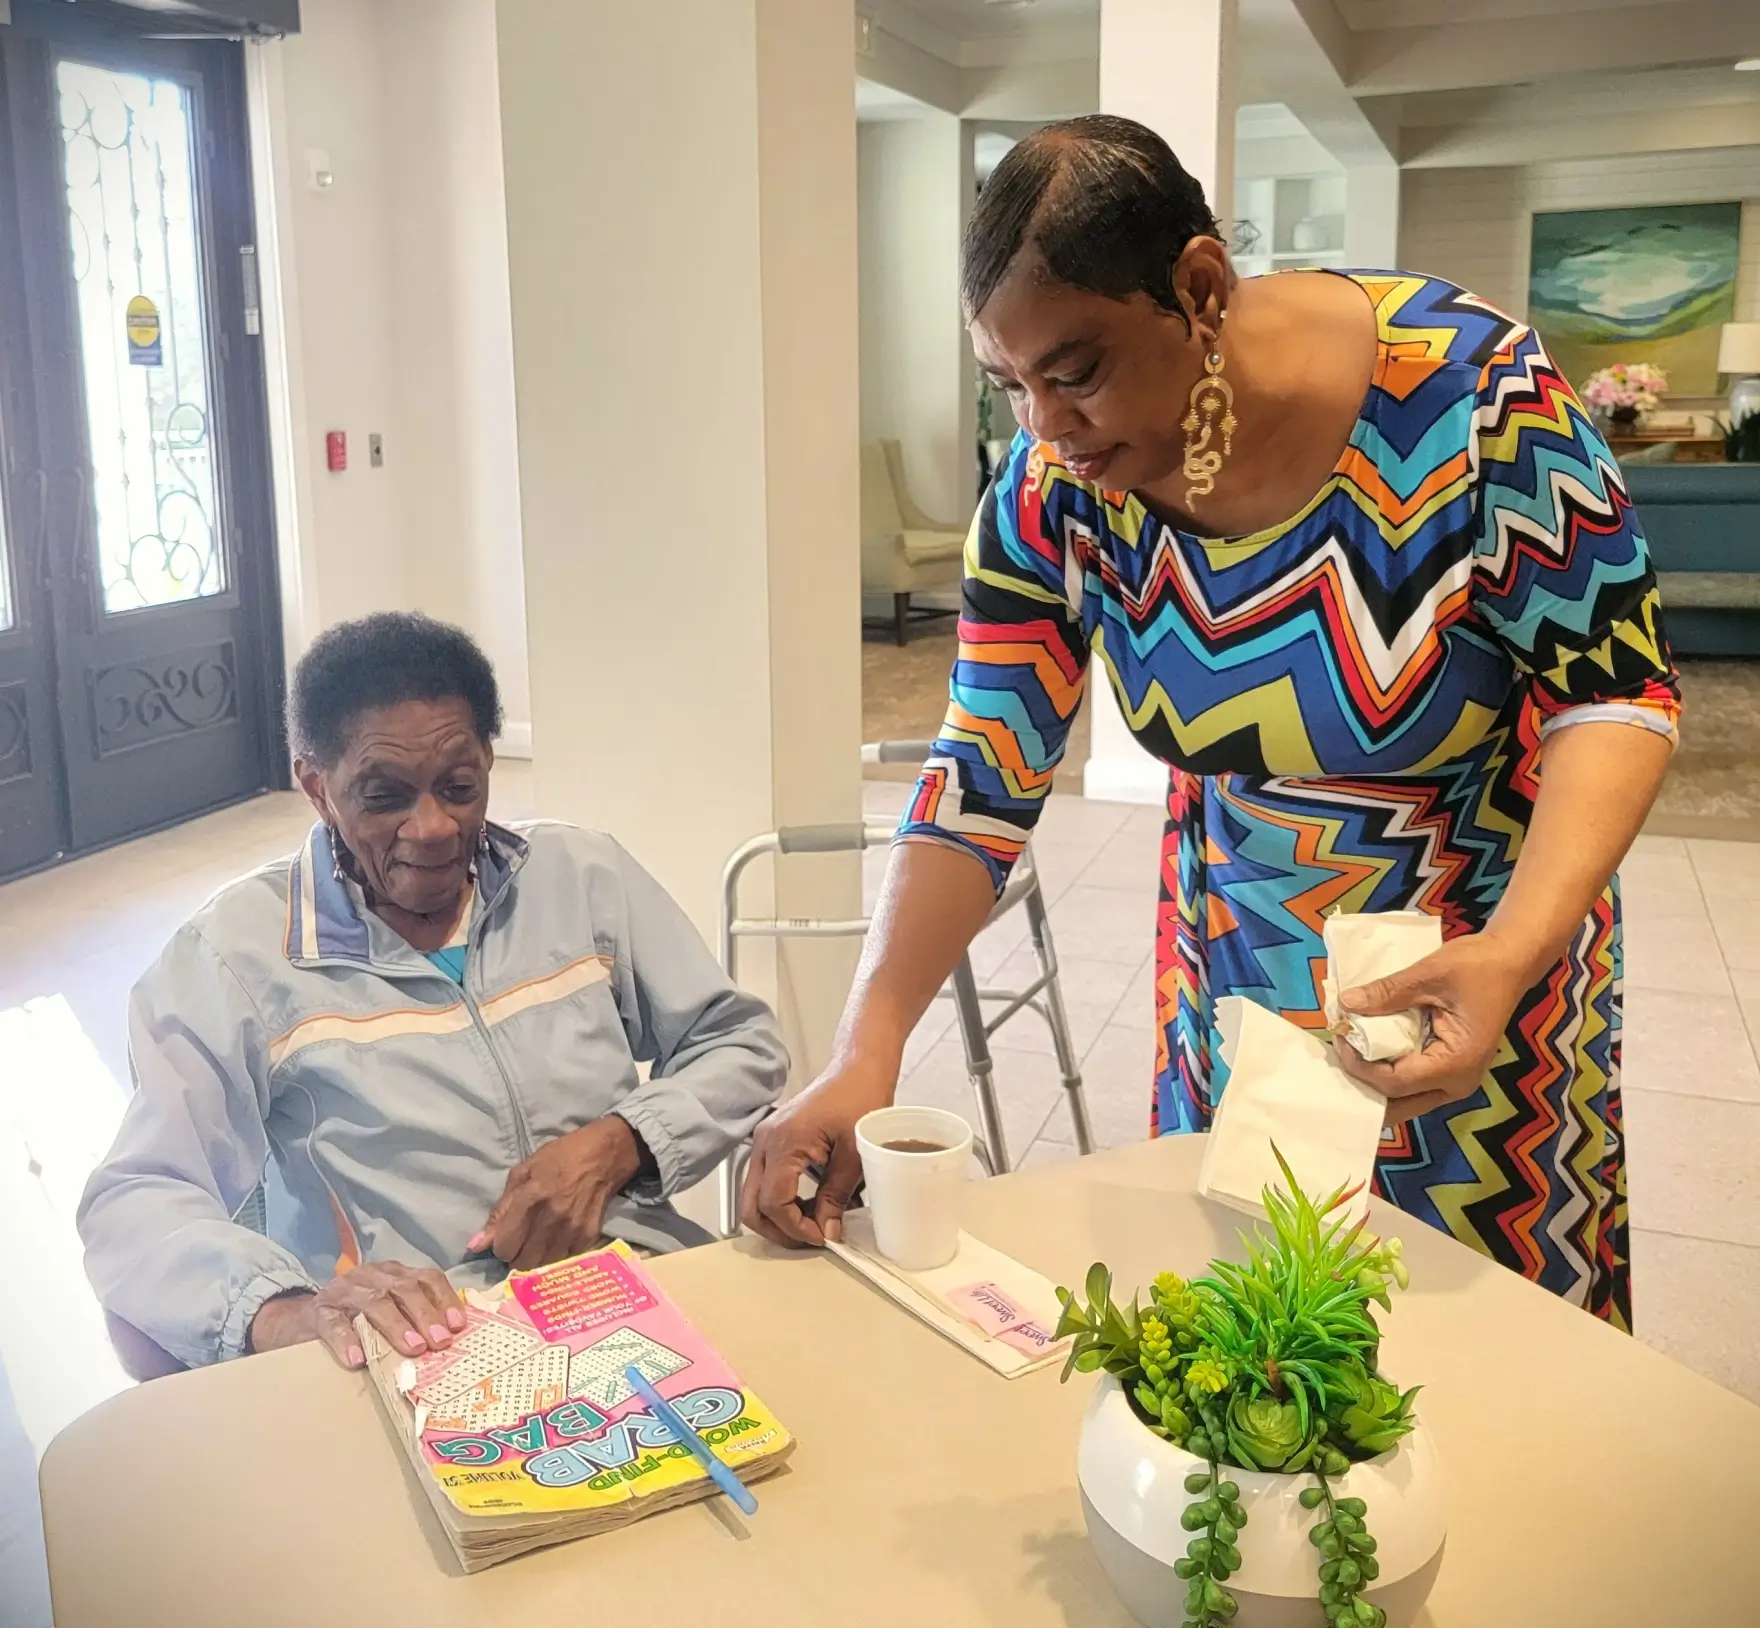 Ms. Sheila Caldwell, a retired mental health counselor, organizes community activities and social events for seniors at Pendana Senior Residences, a community within West Lakes in Orlando.